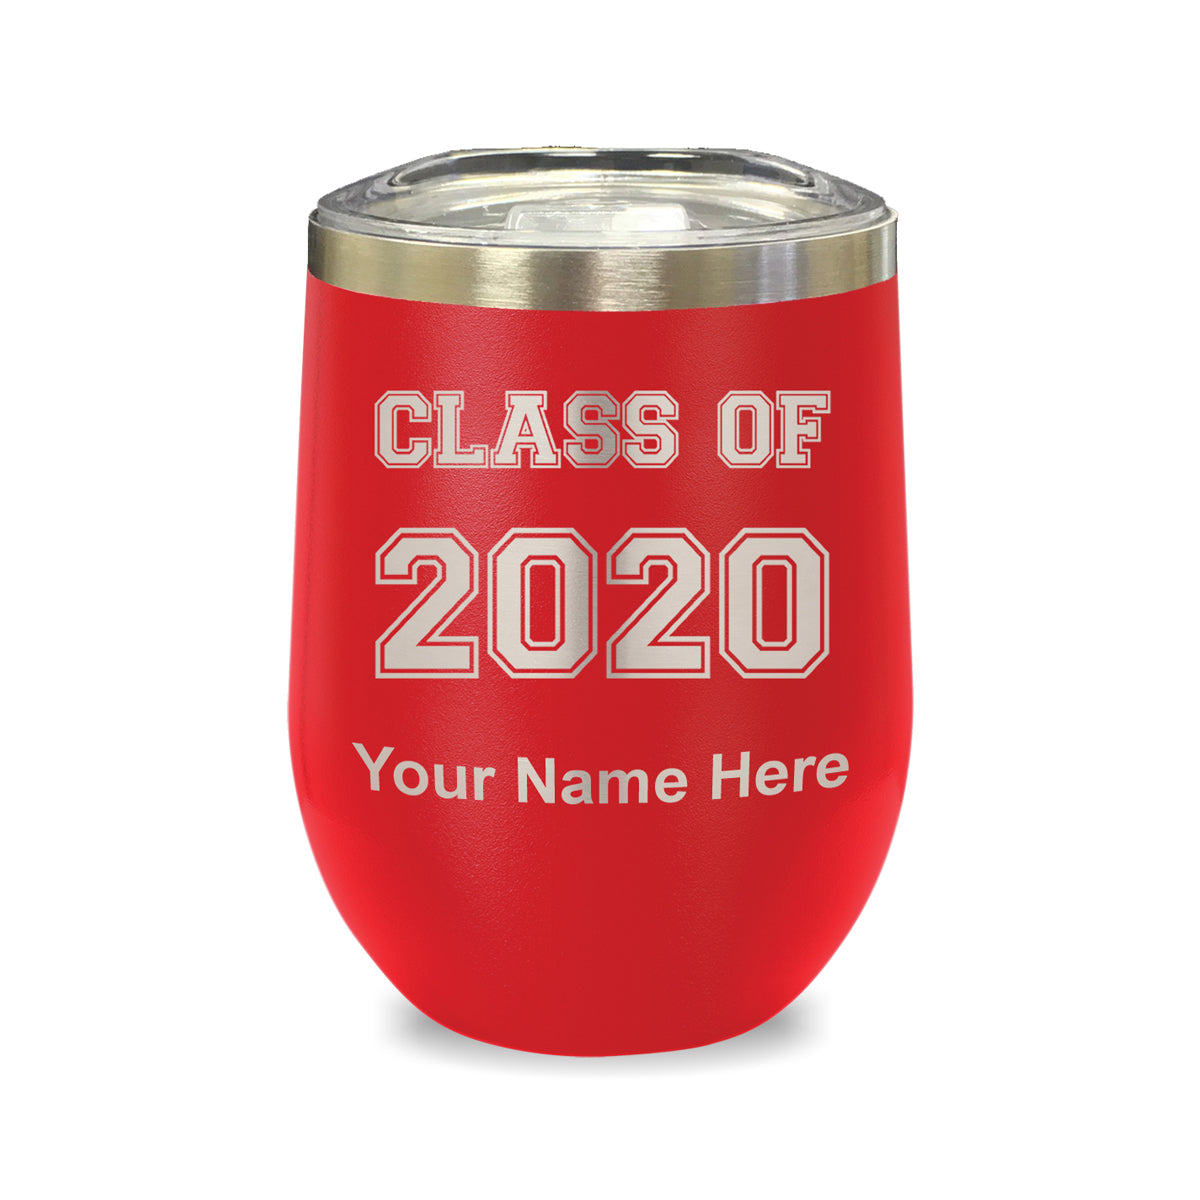 LaserGram Double Wall Stainless Steel Wine Glass, Class of 2020, 2021, 2022, 2023, 2024, 2025, Personalized Engraving Included